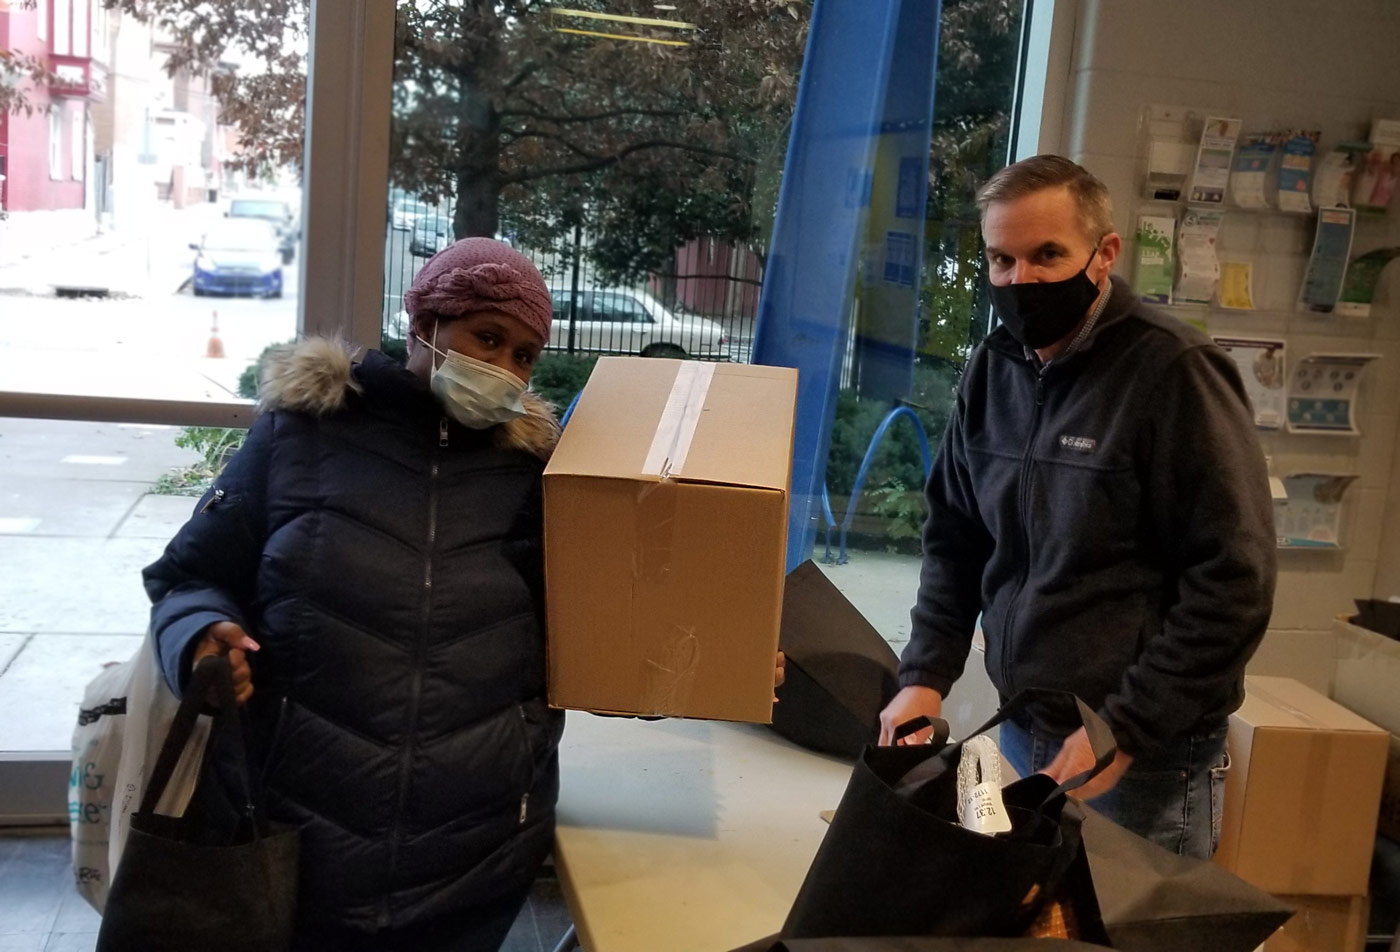 Resident received box of food from Lenfest's weekly food distribution